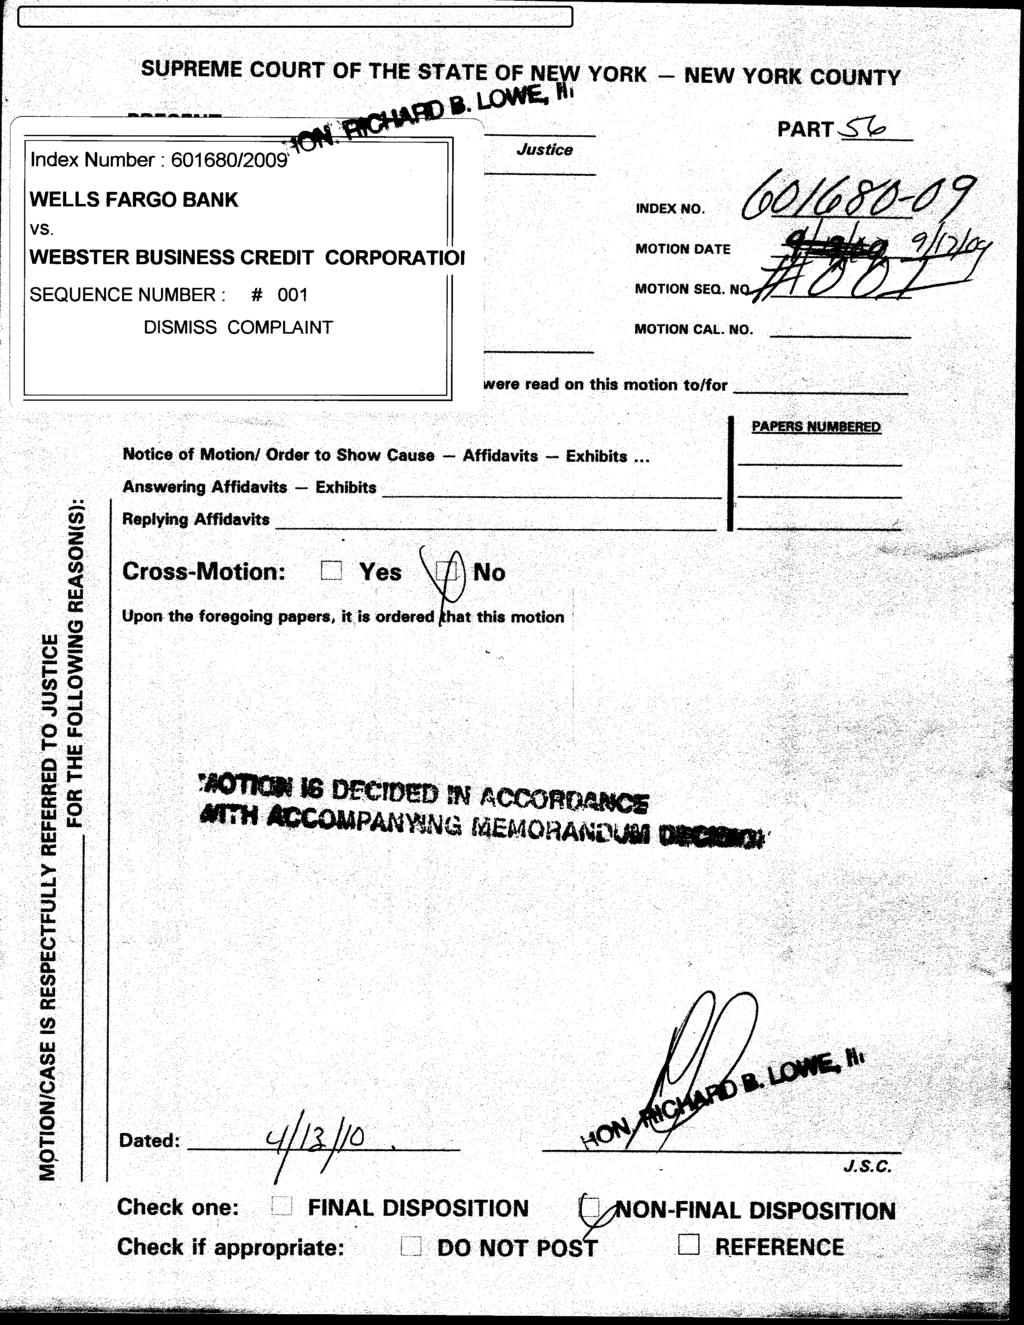 [* FILED: 1] NEW YORK COUNTY CLERK 04/16/2010 INDEX NO. 601680/2009 NYSCEF DOC. NO. 22 RECEIVED NYSCEF: 04/16/2010 SijPREME COURT OF THE STATE Of NEW YORK - Index Number : 601680/2009' a. L()WE.